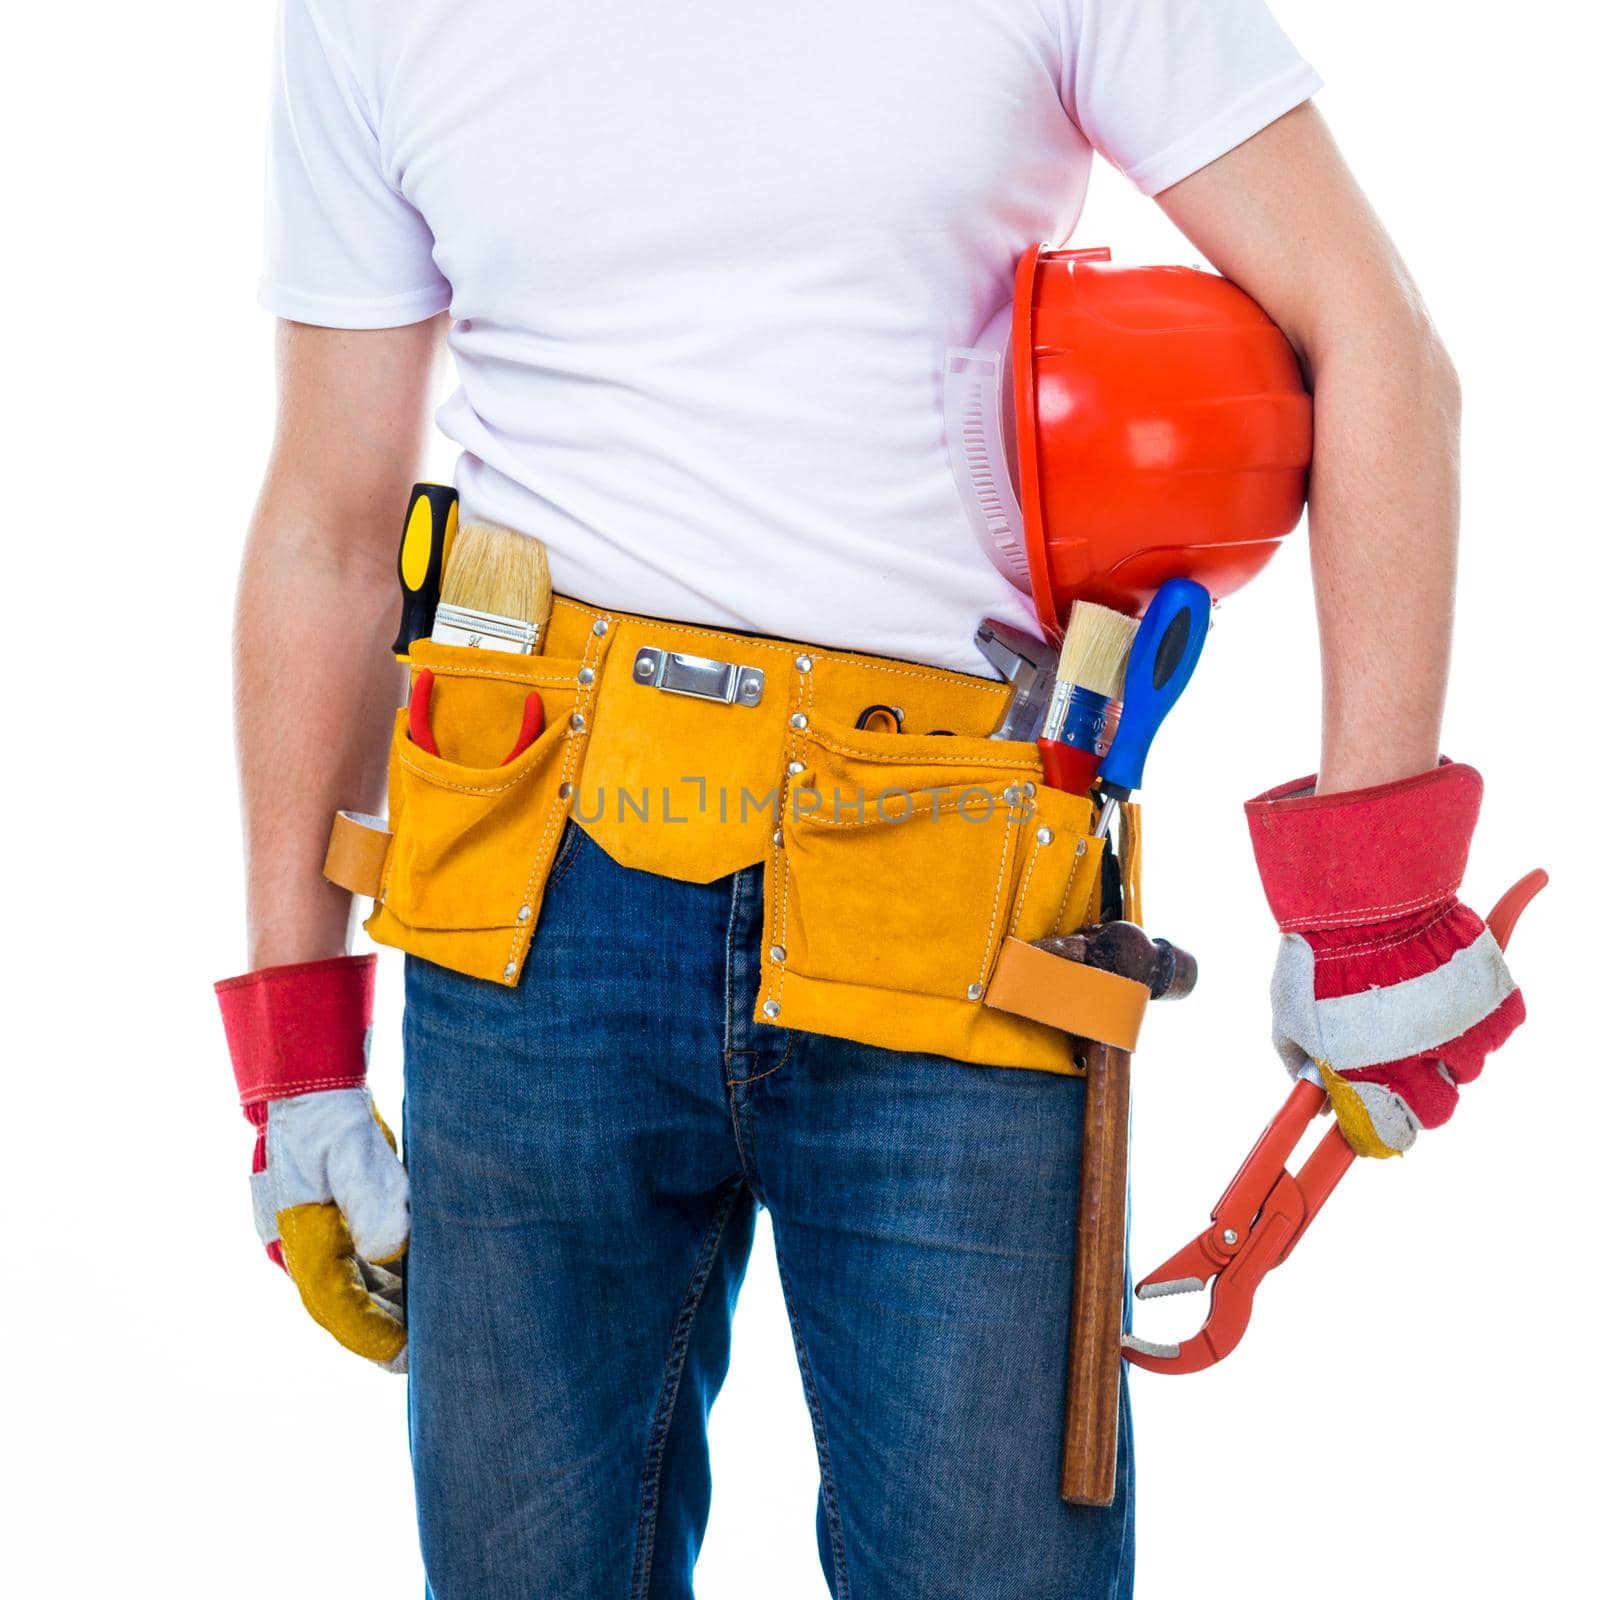 worker with tools belt holding an adjustable wrench